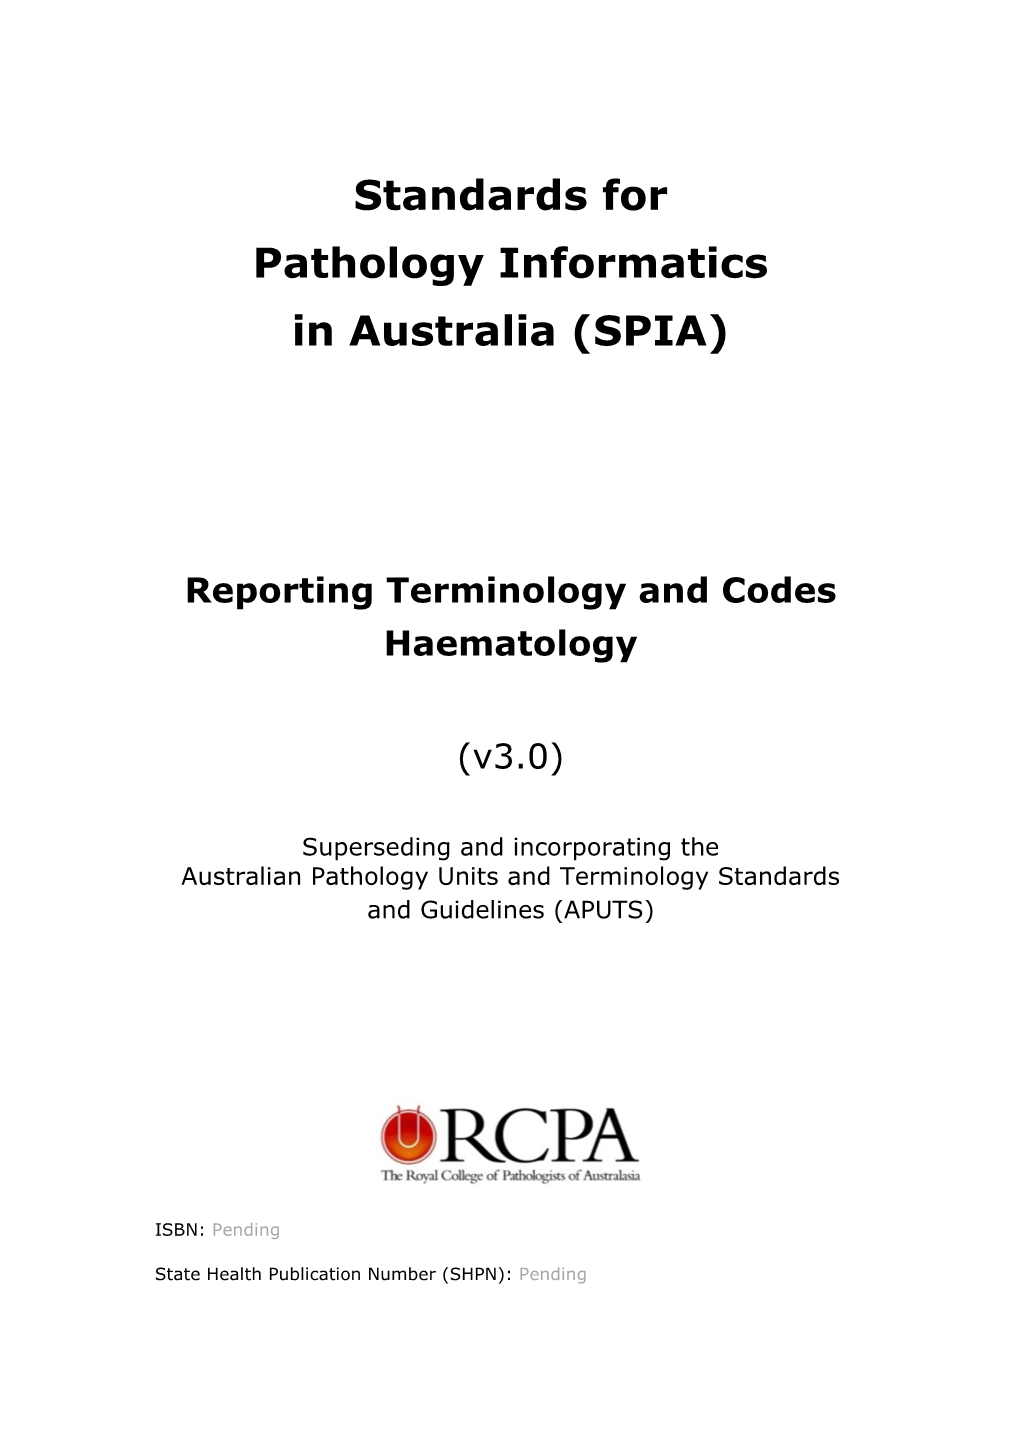 (SPIA) Reporting Terminology and Codes Haematology